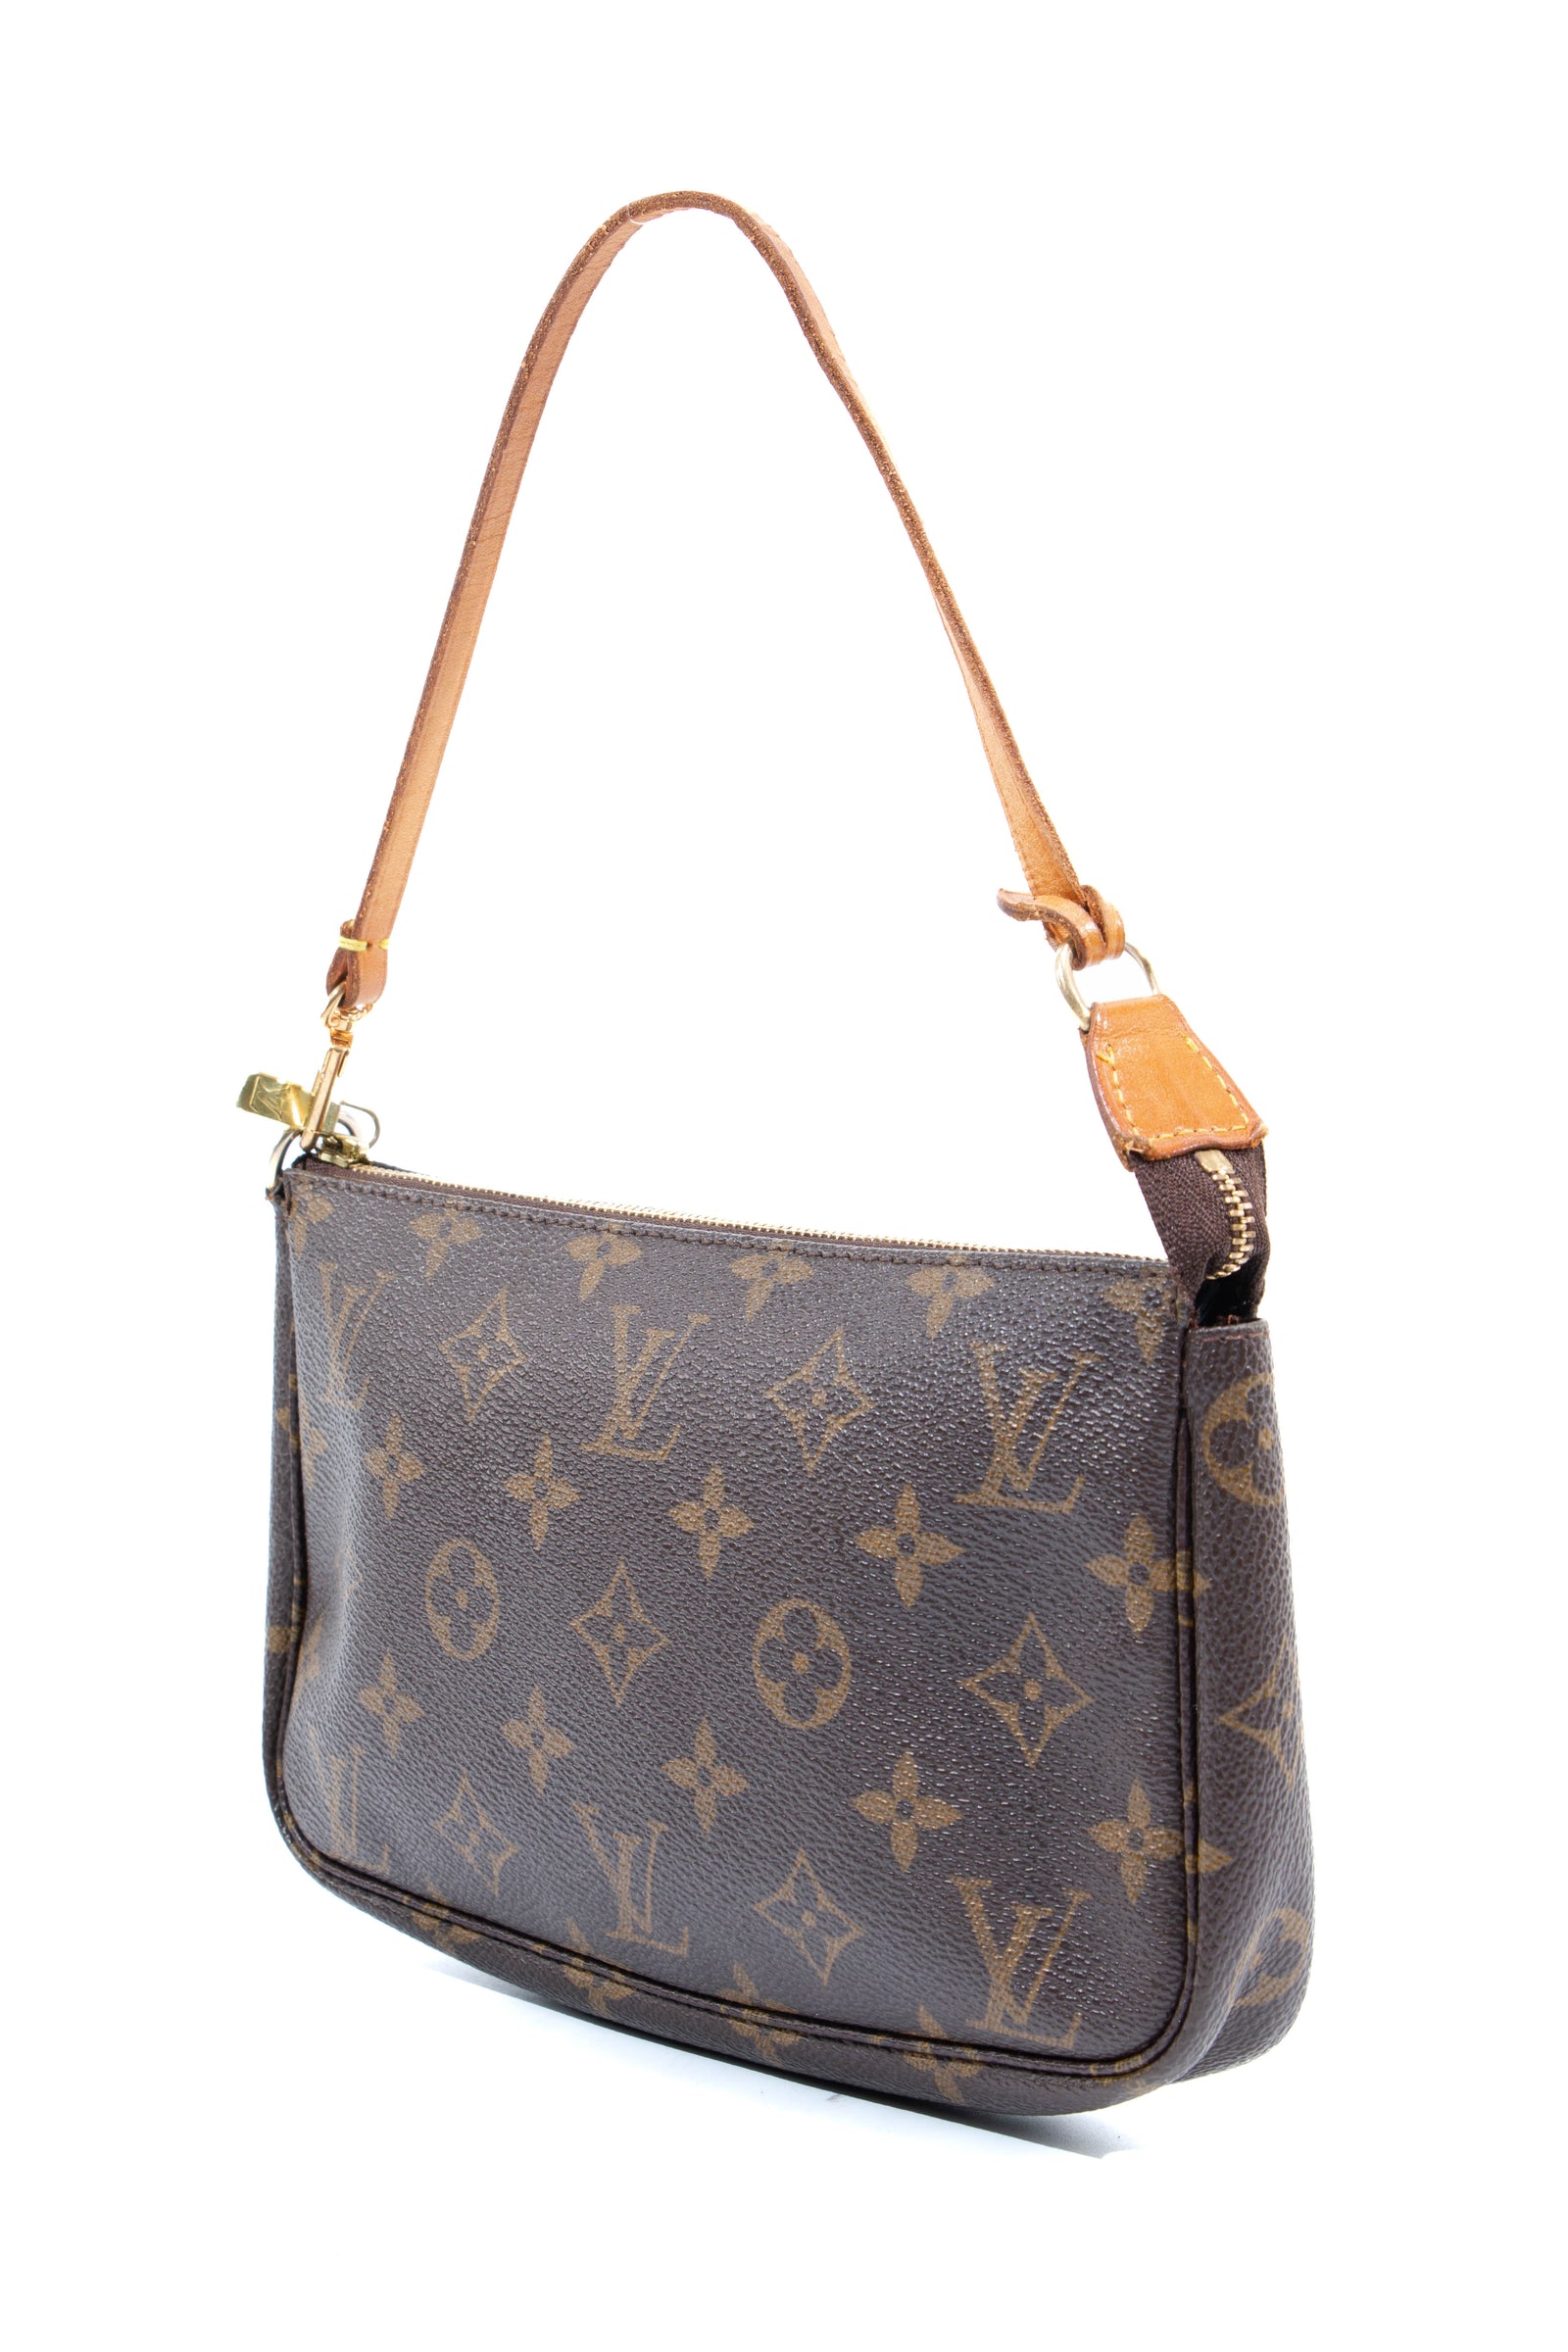 Hand bags – tagged Louis vuitton– Collectors cage